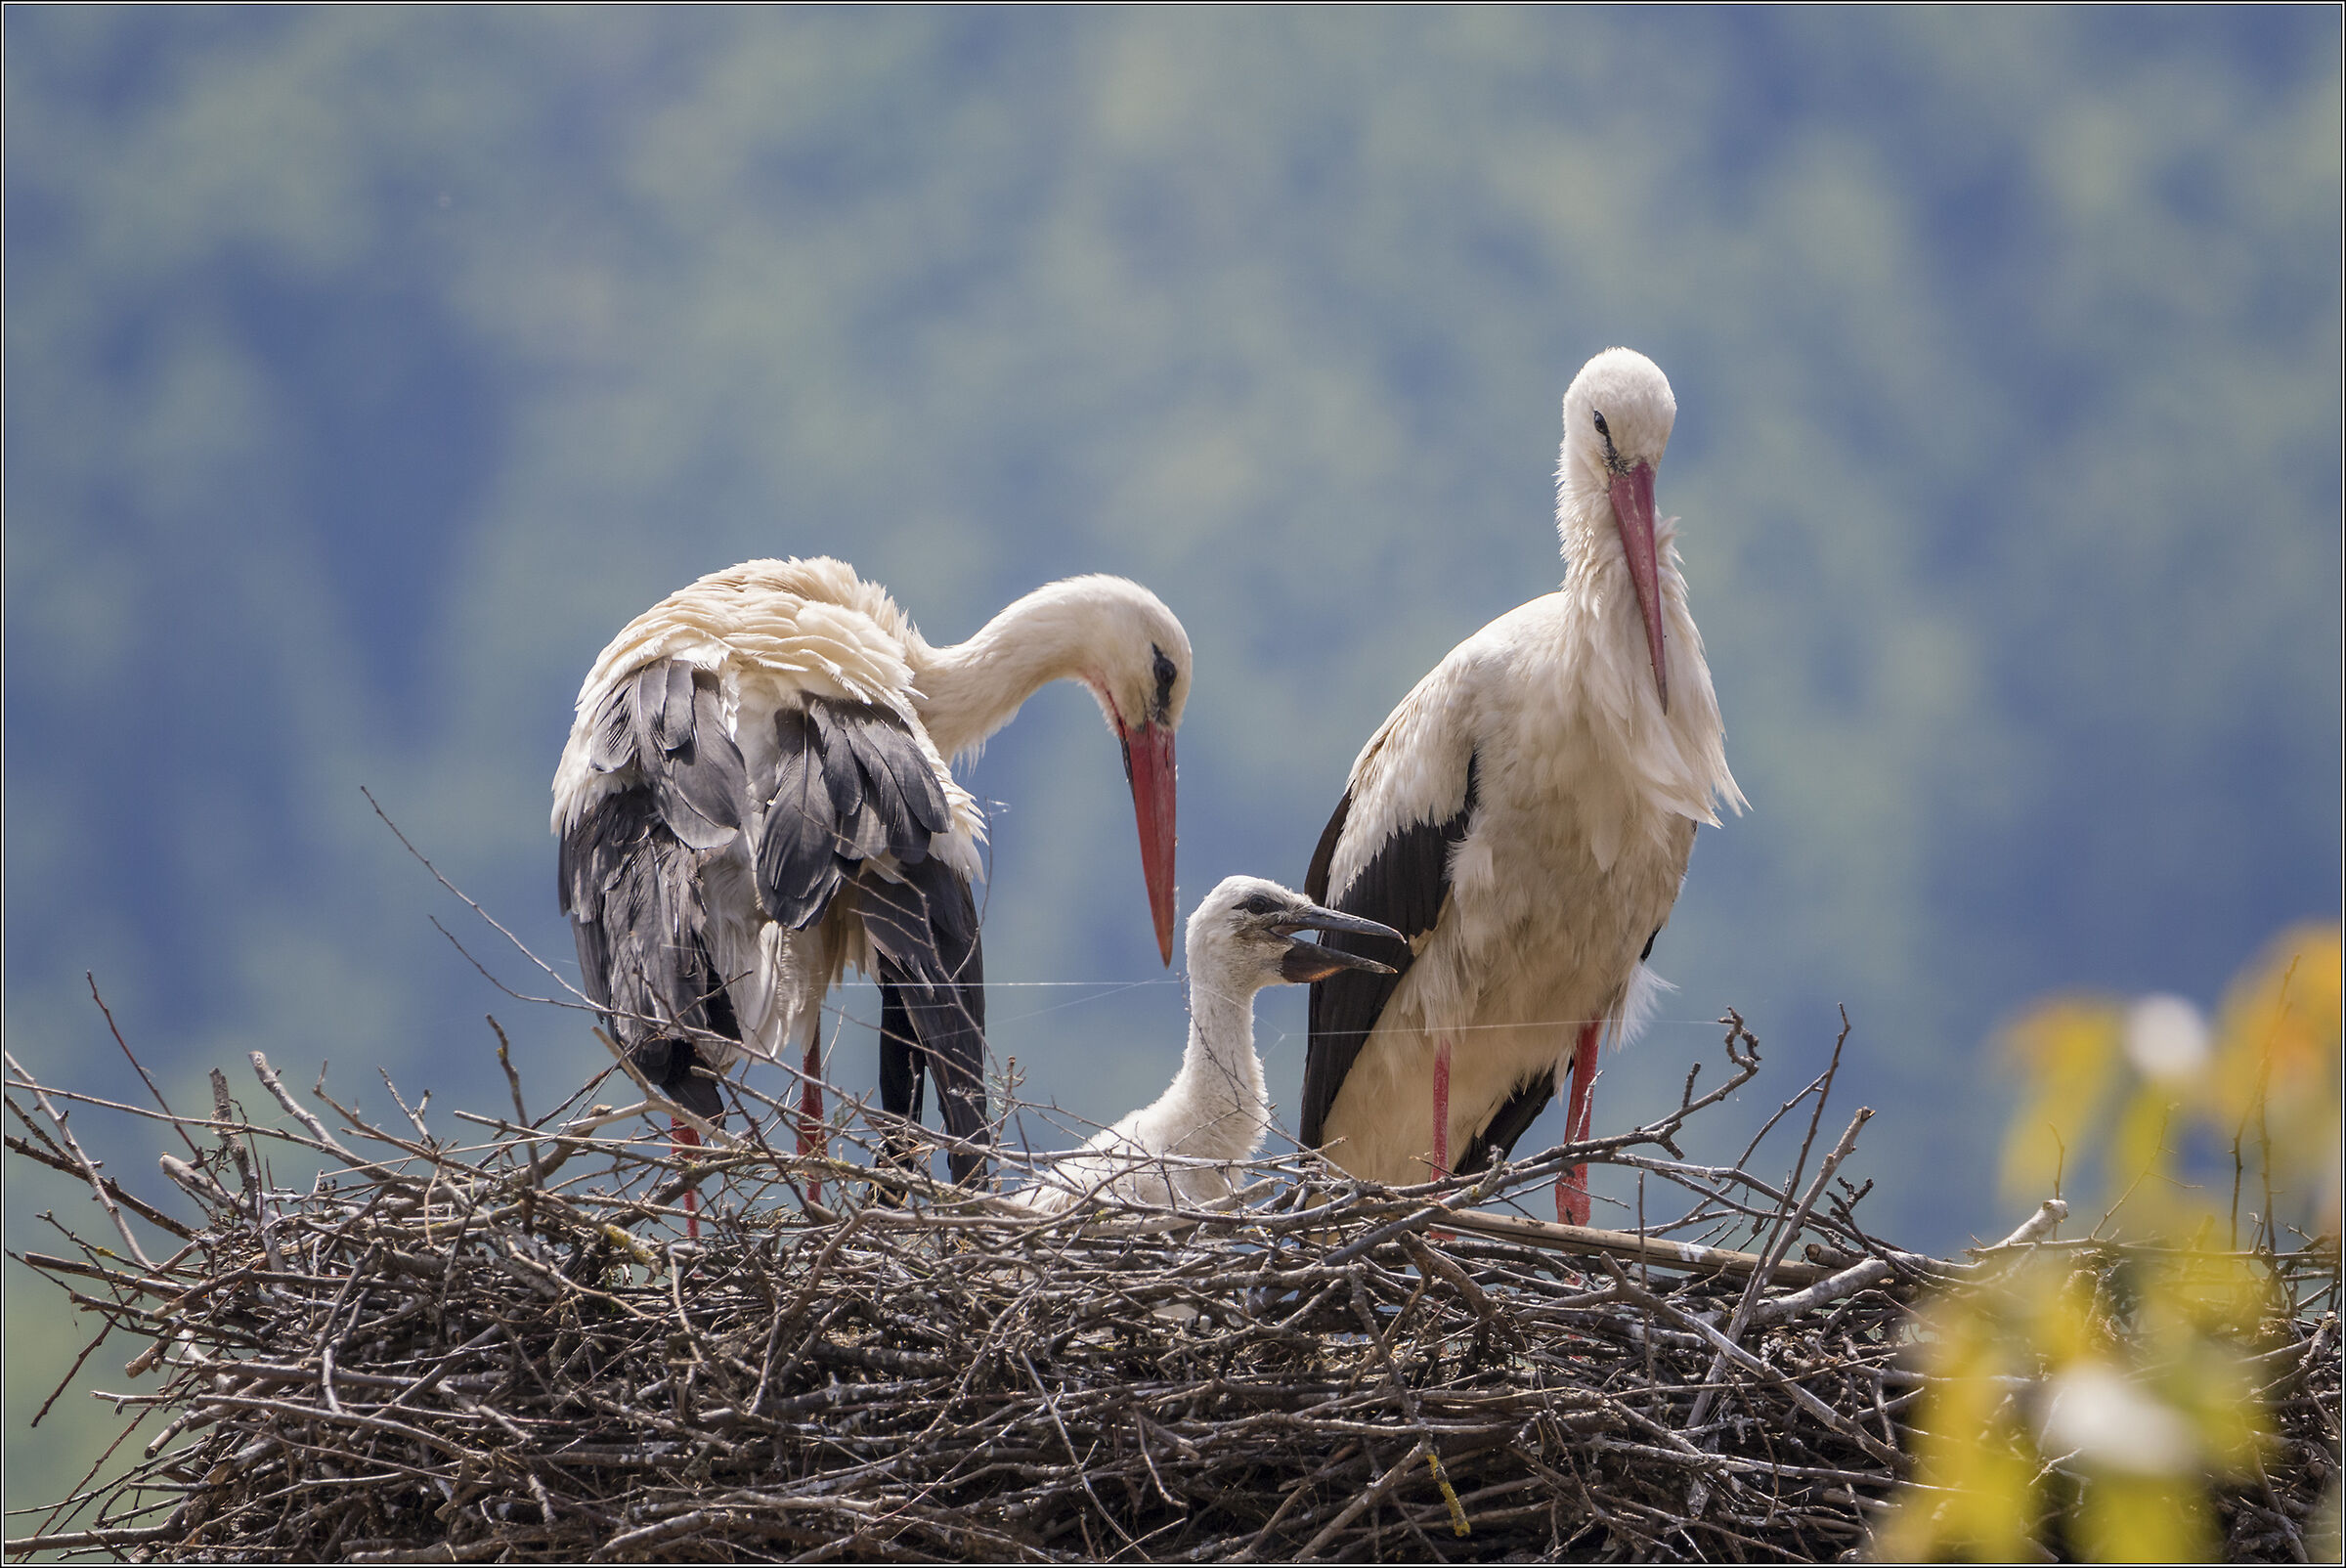 storks in the nest with chicken...